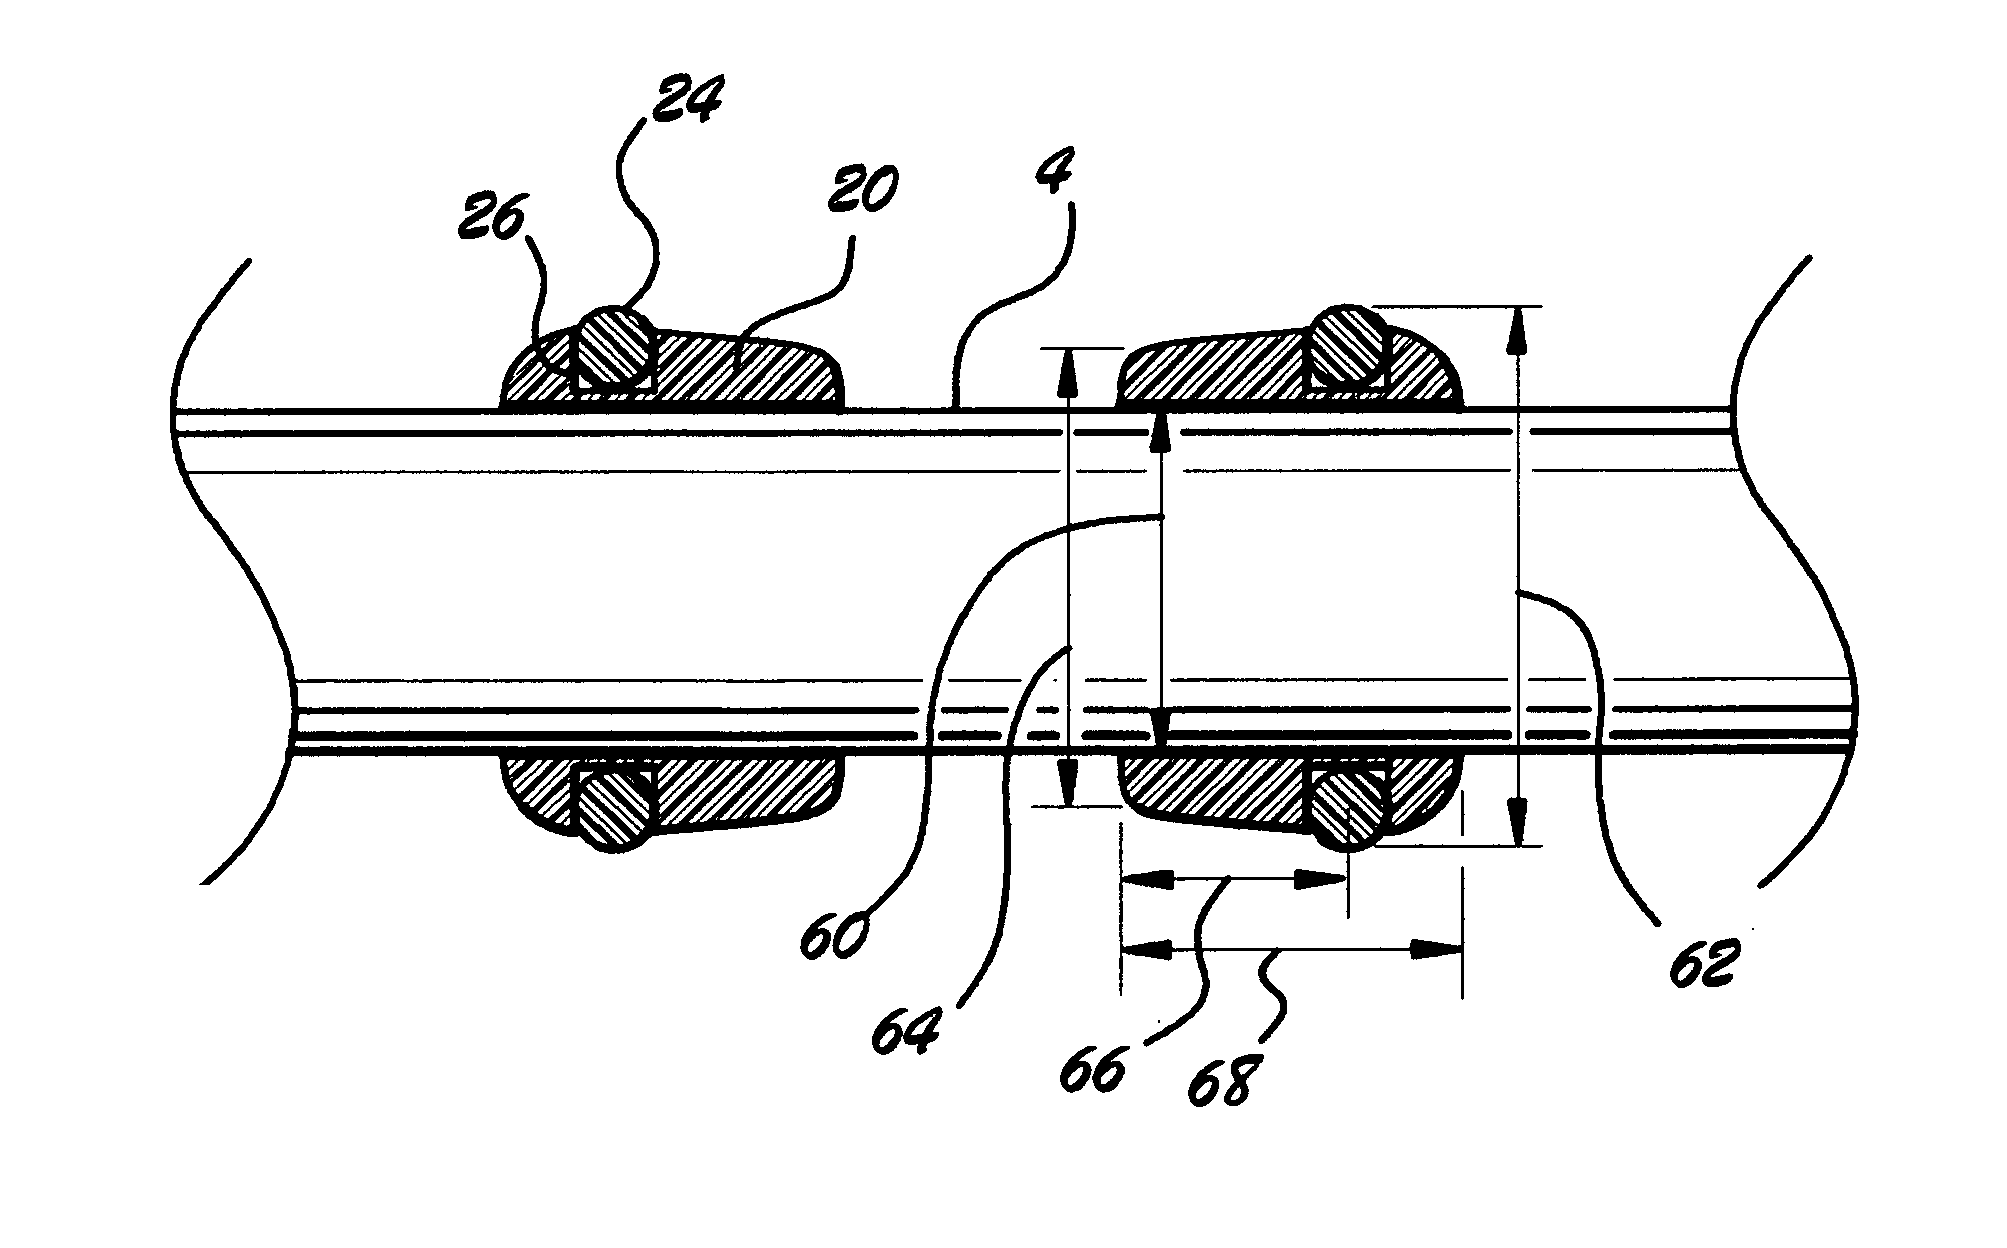 Ergonomic rings for drum sticks, method of installation, and method of use